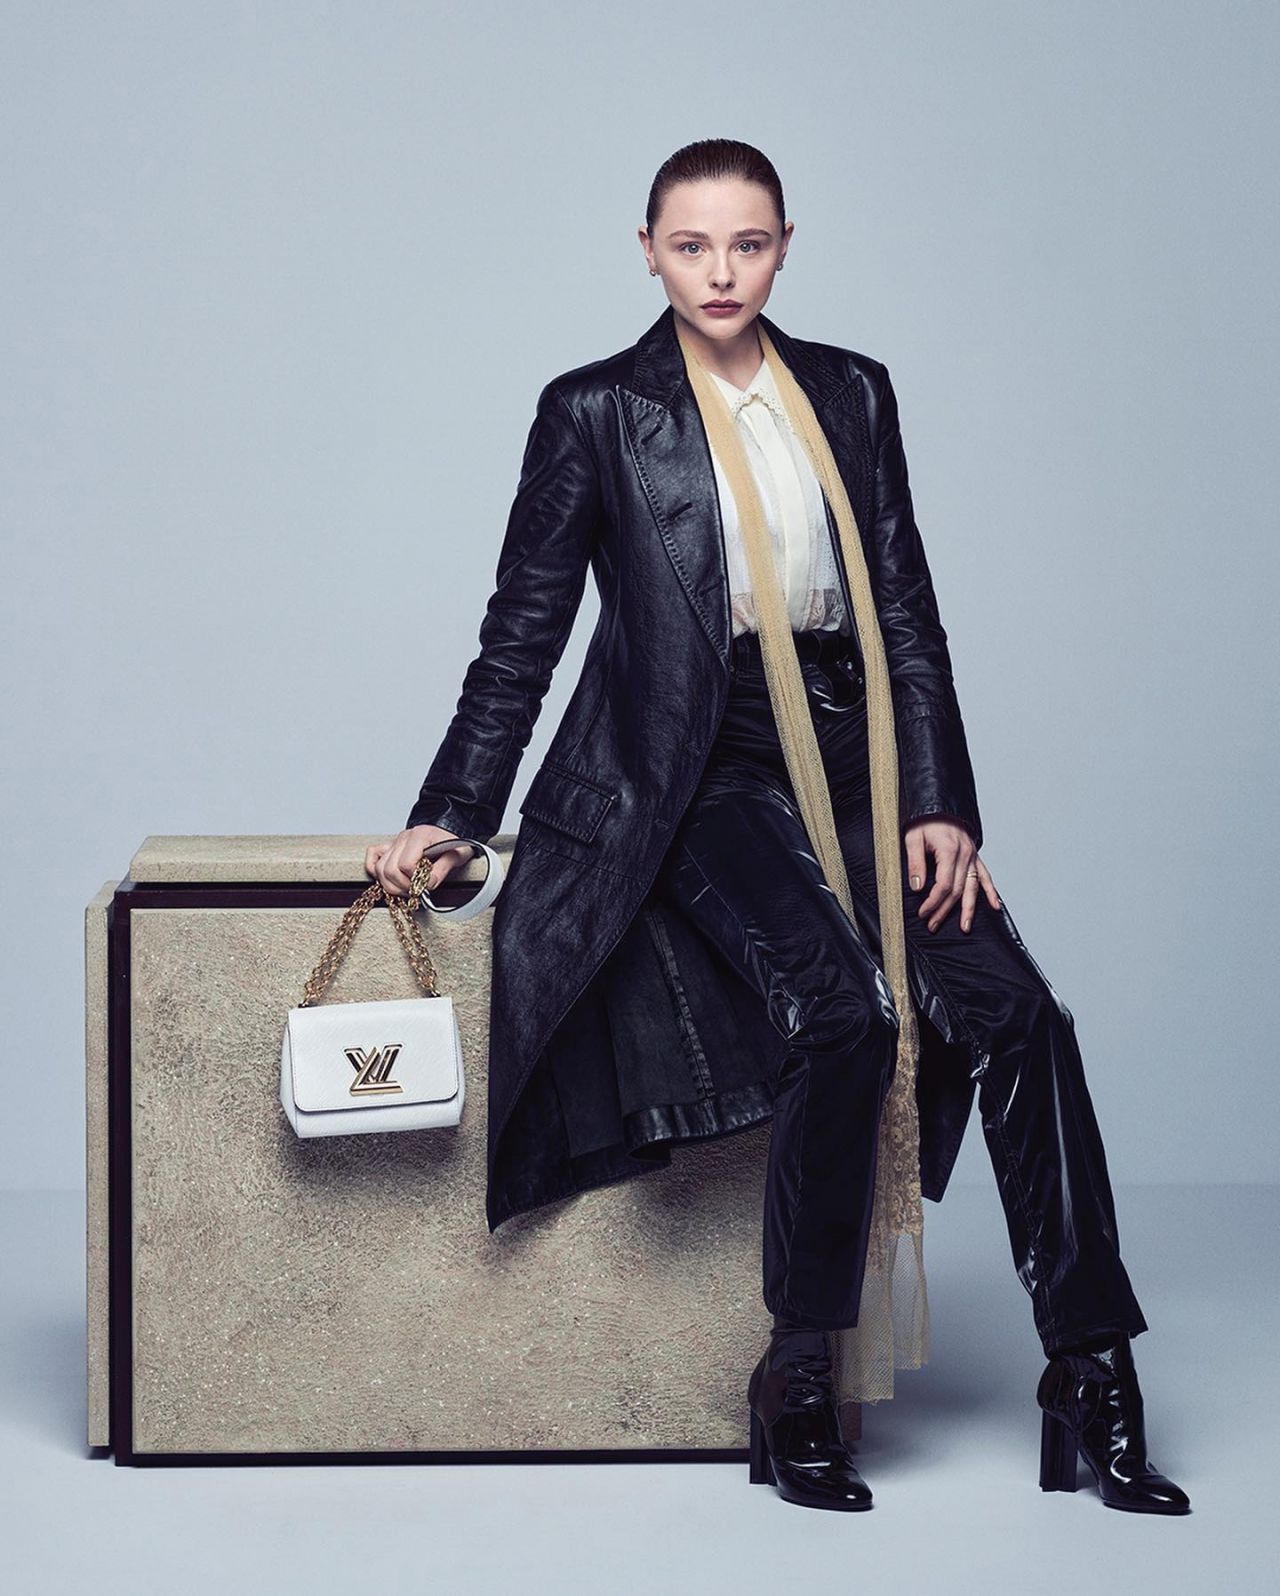 Chloe Grace Moretz is alluring in a new Louis Vuitton campaign